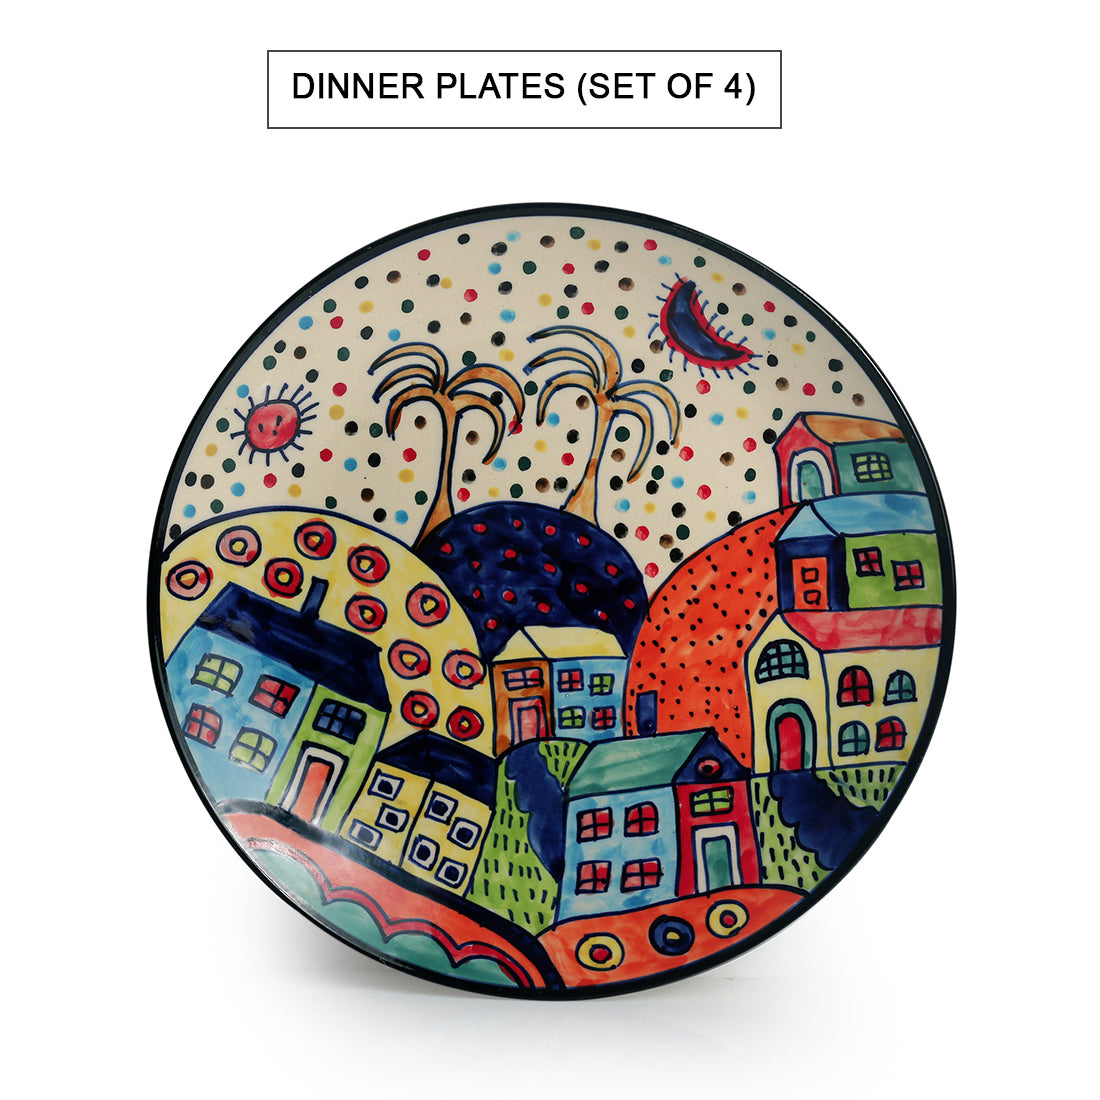 'Hut Dining' Handpainted Ceramic Dinner Plates With Katoris & Serving Bowls (10 Pieces, Serving for 4)